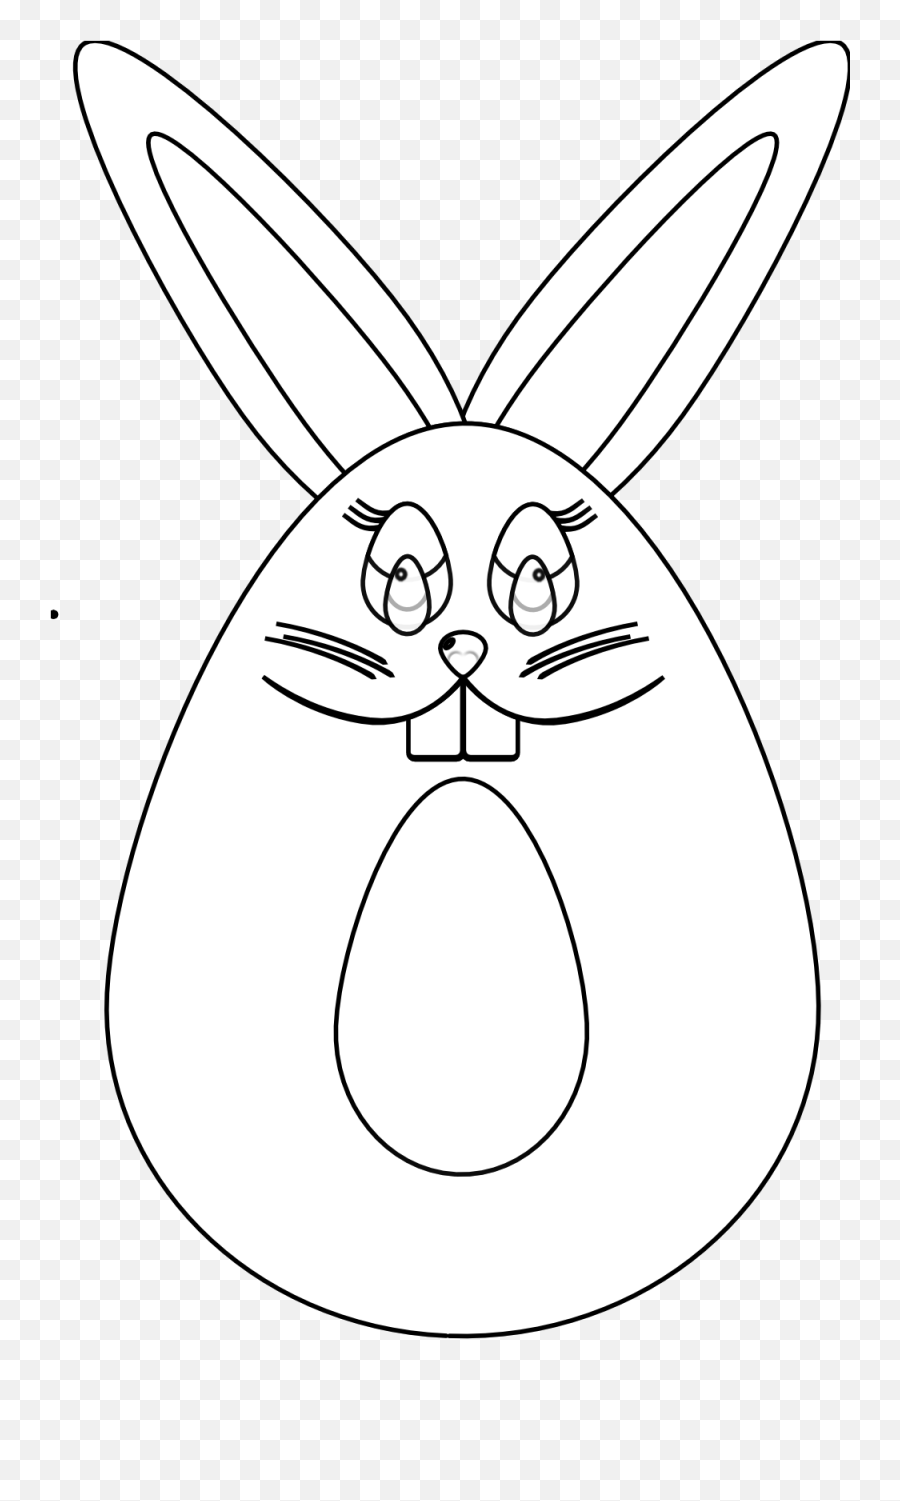 Bunny Clipart Black And White - Clip Art Library Emoji,Bunny Clipart Black And White